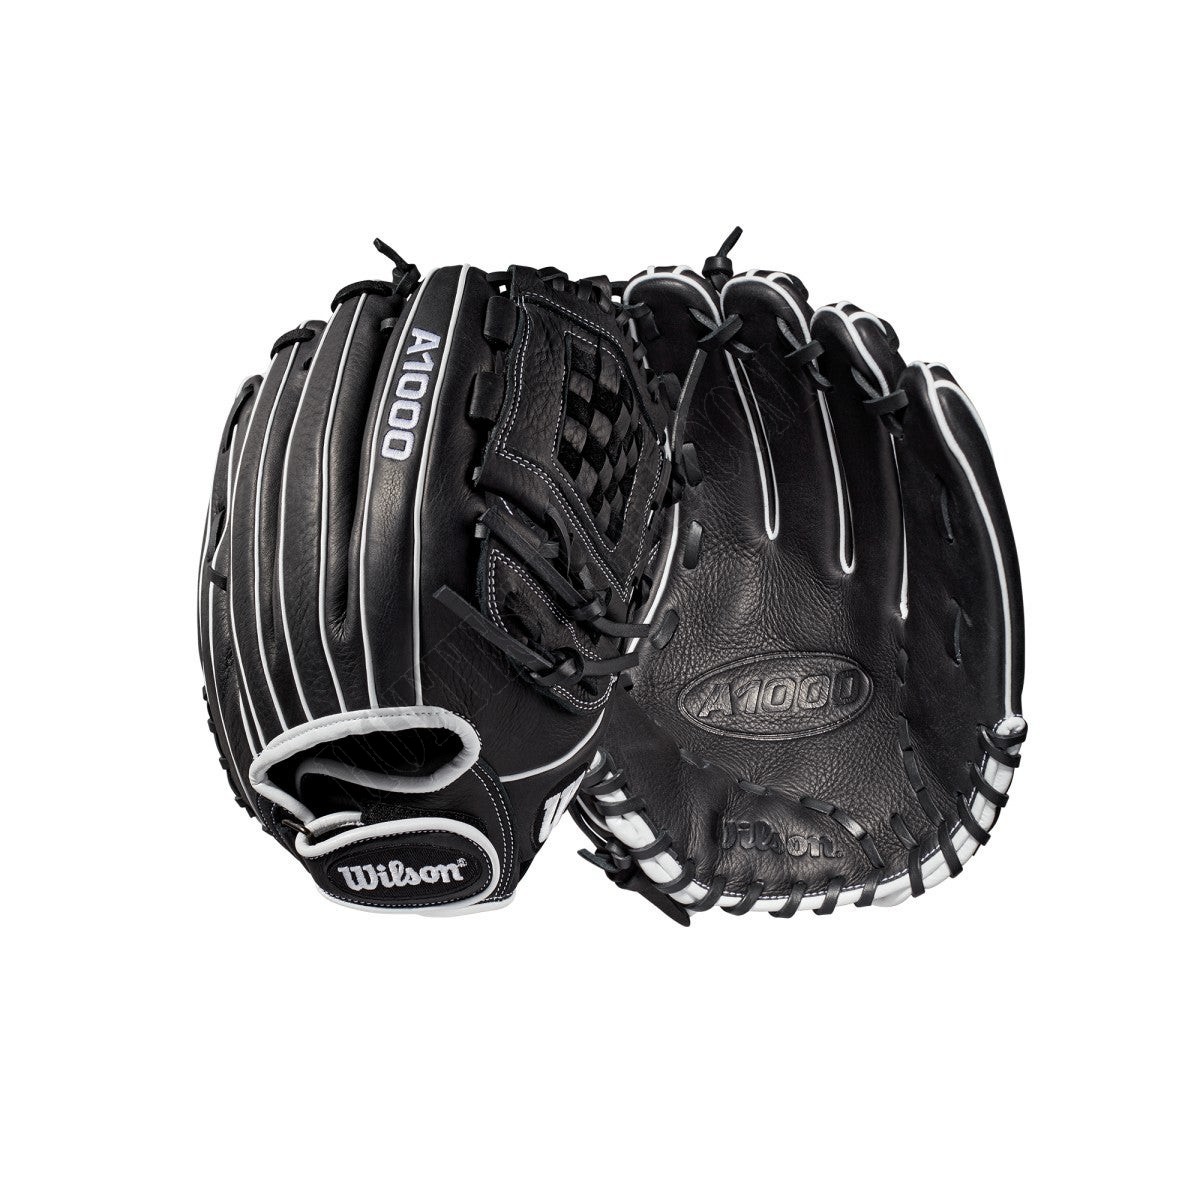 2019 A1000 12" Pitcher's Fastpitch Glove ● Wilson Promotions - -0